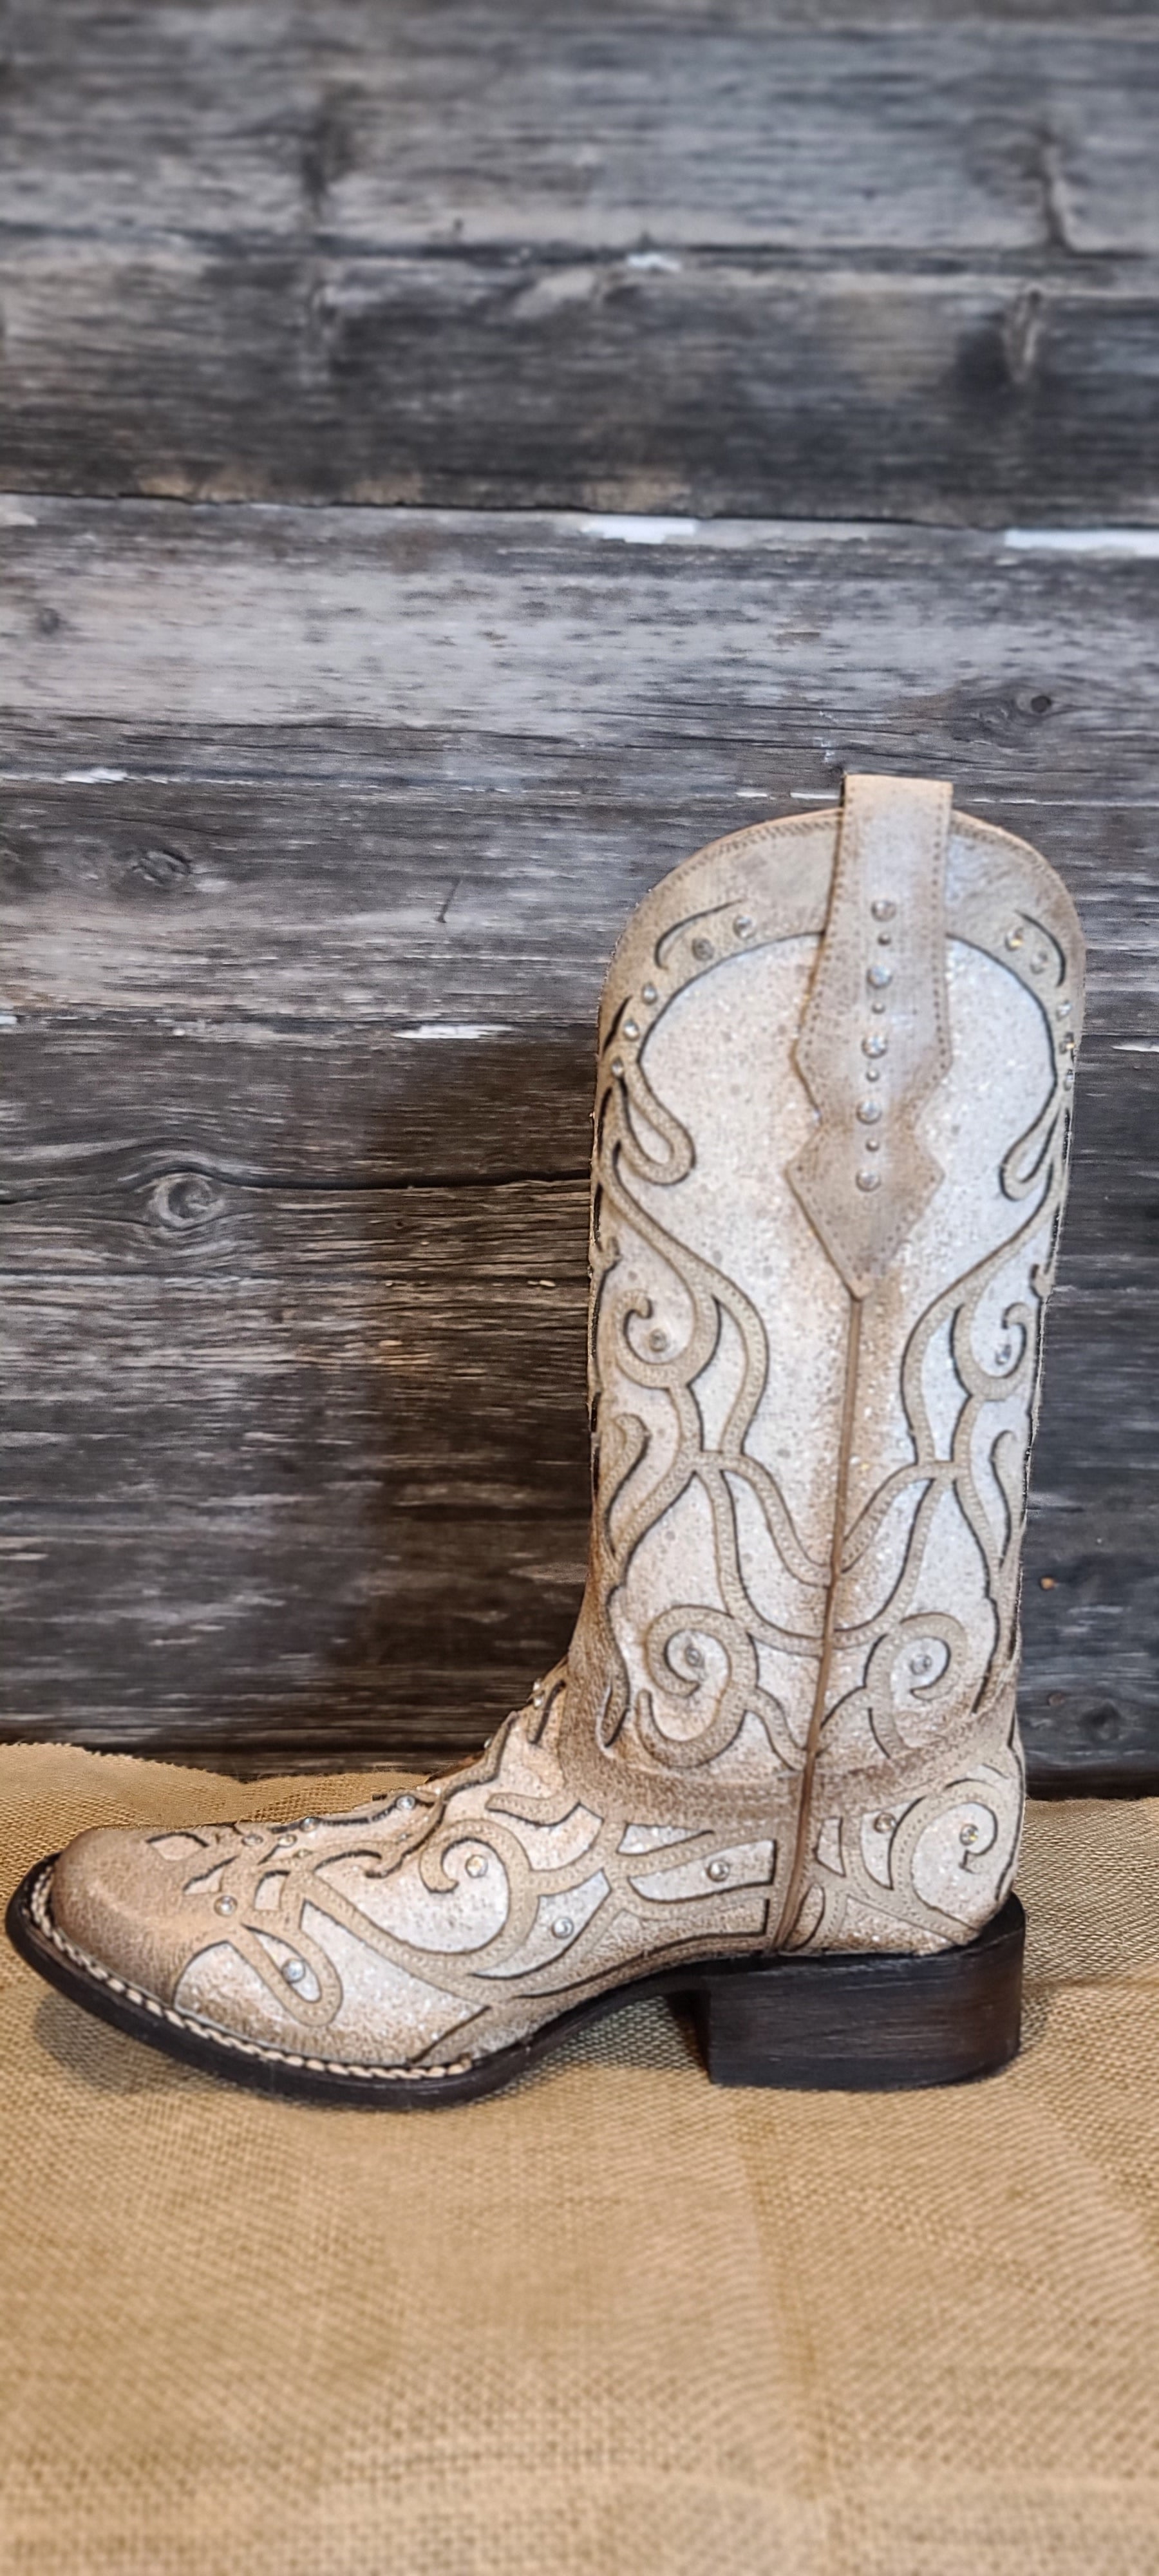 CORRAL GLITTER LEATHER WESTERN BOOT STYLE C3482